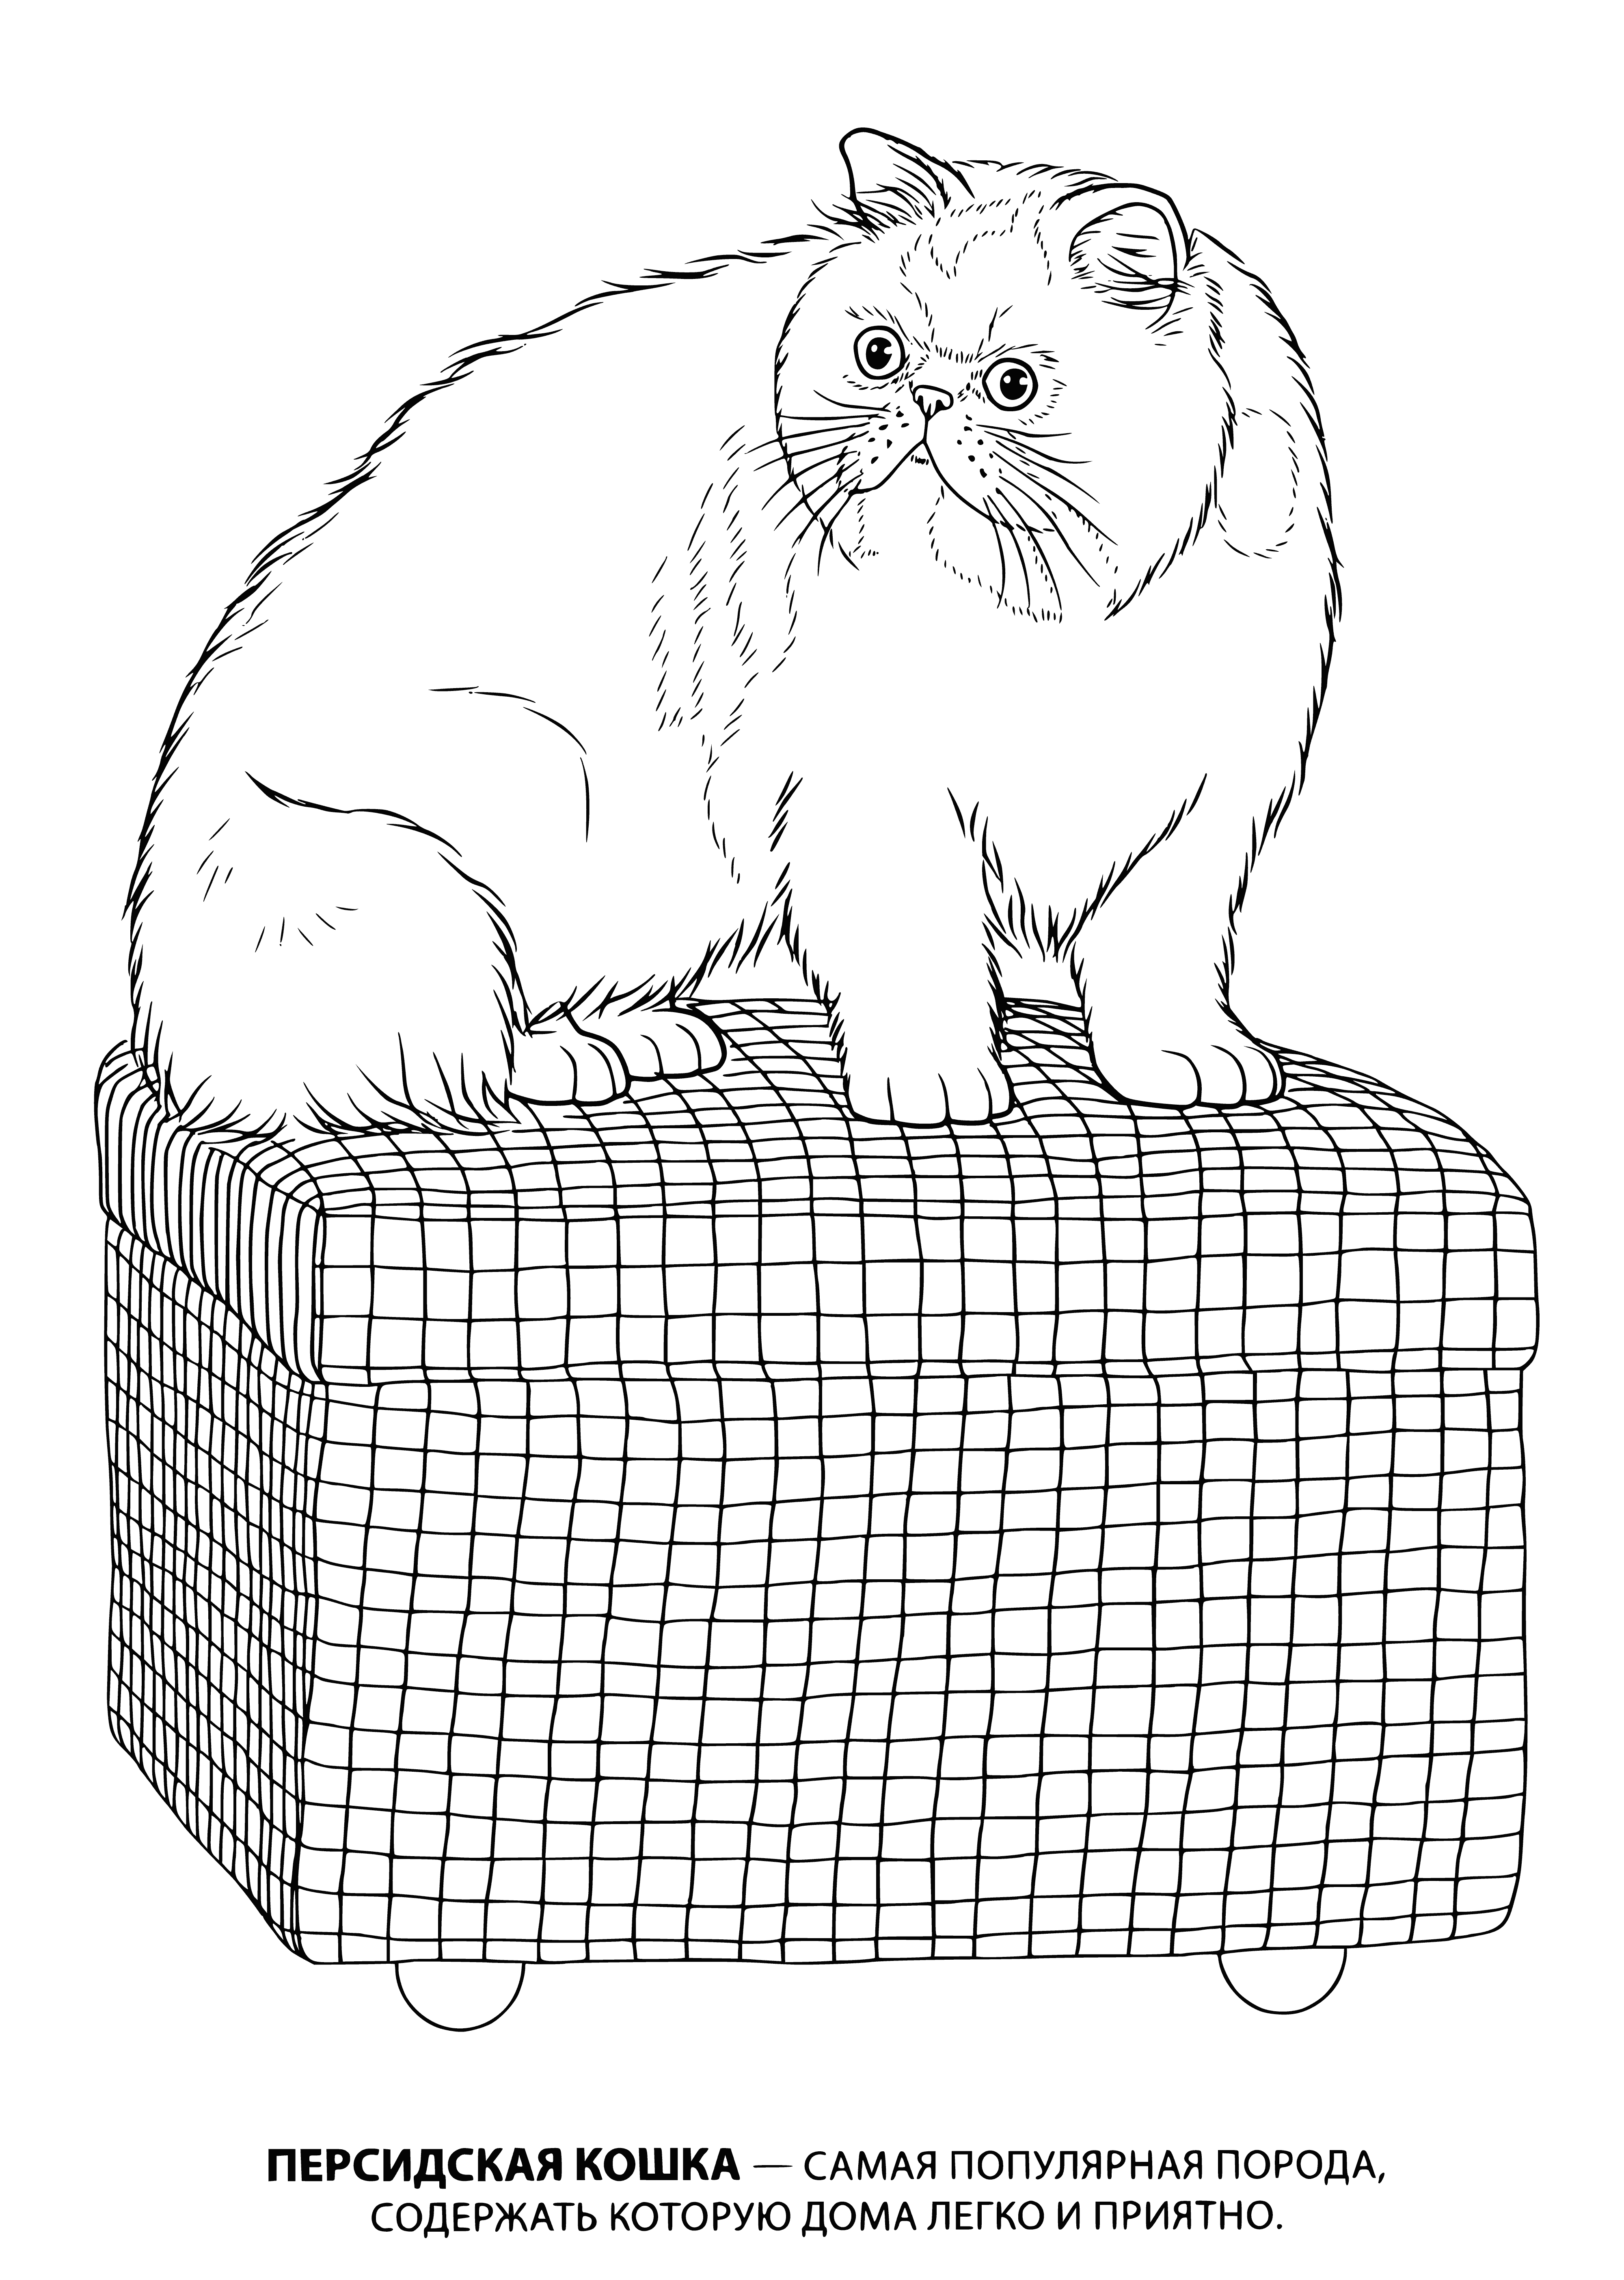 coloring page: Cat lounging on beige couch; short fur, big ears, green eyes, tongue sticking out.